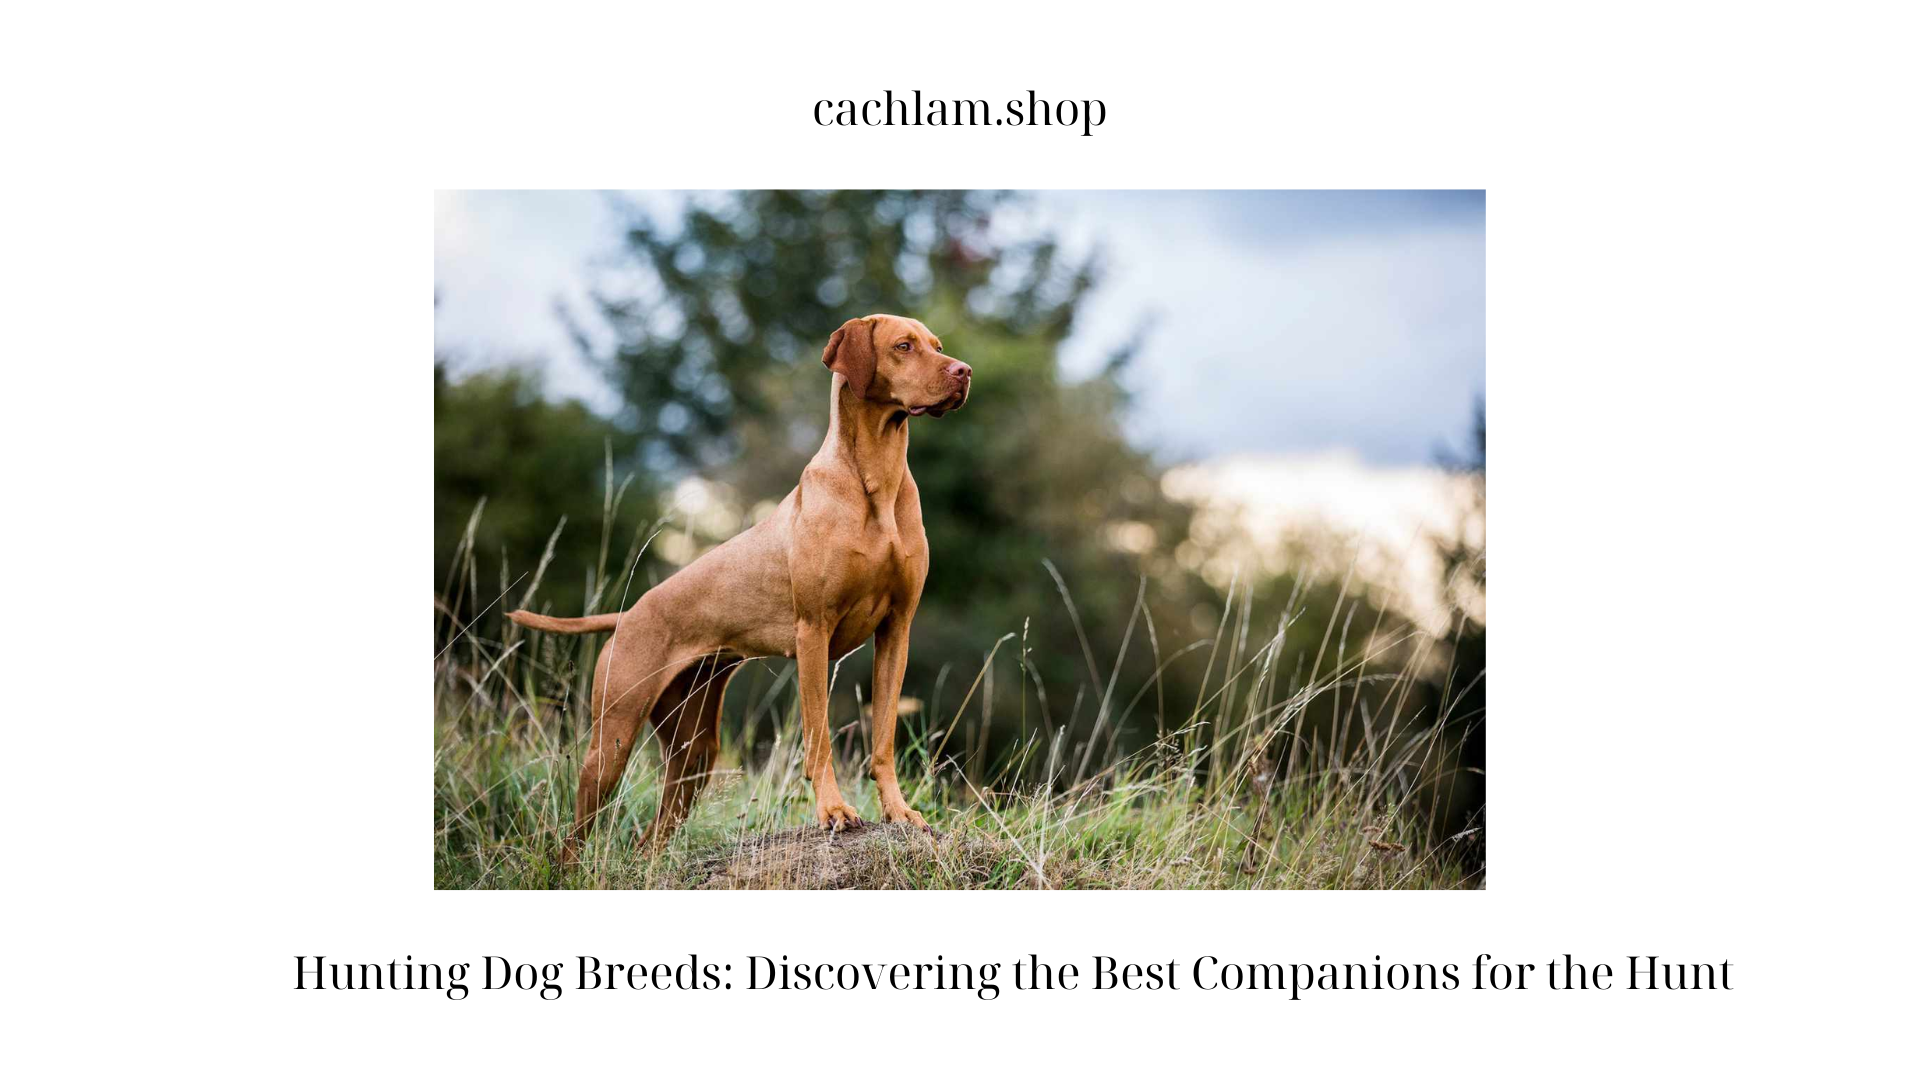 Hunting Dog Breeds: Discovering the Best Companions for the Hunt